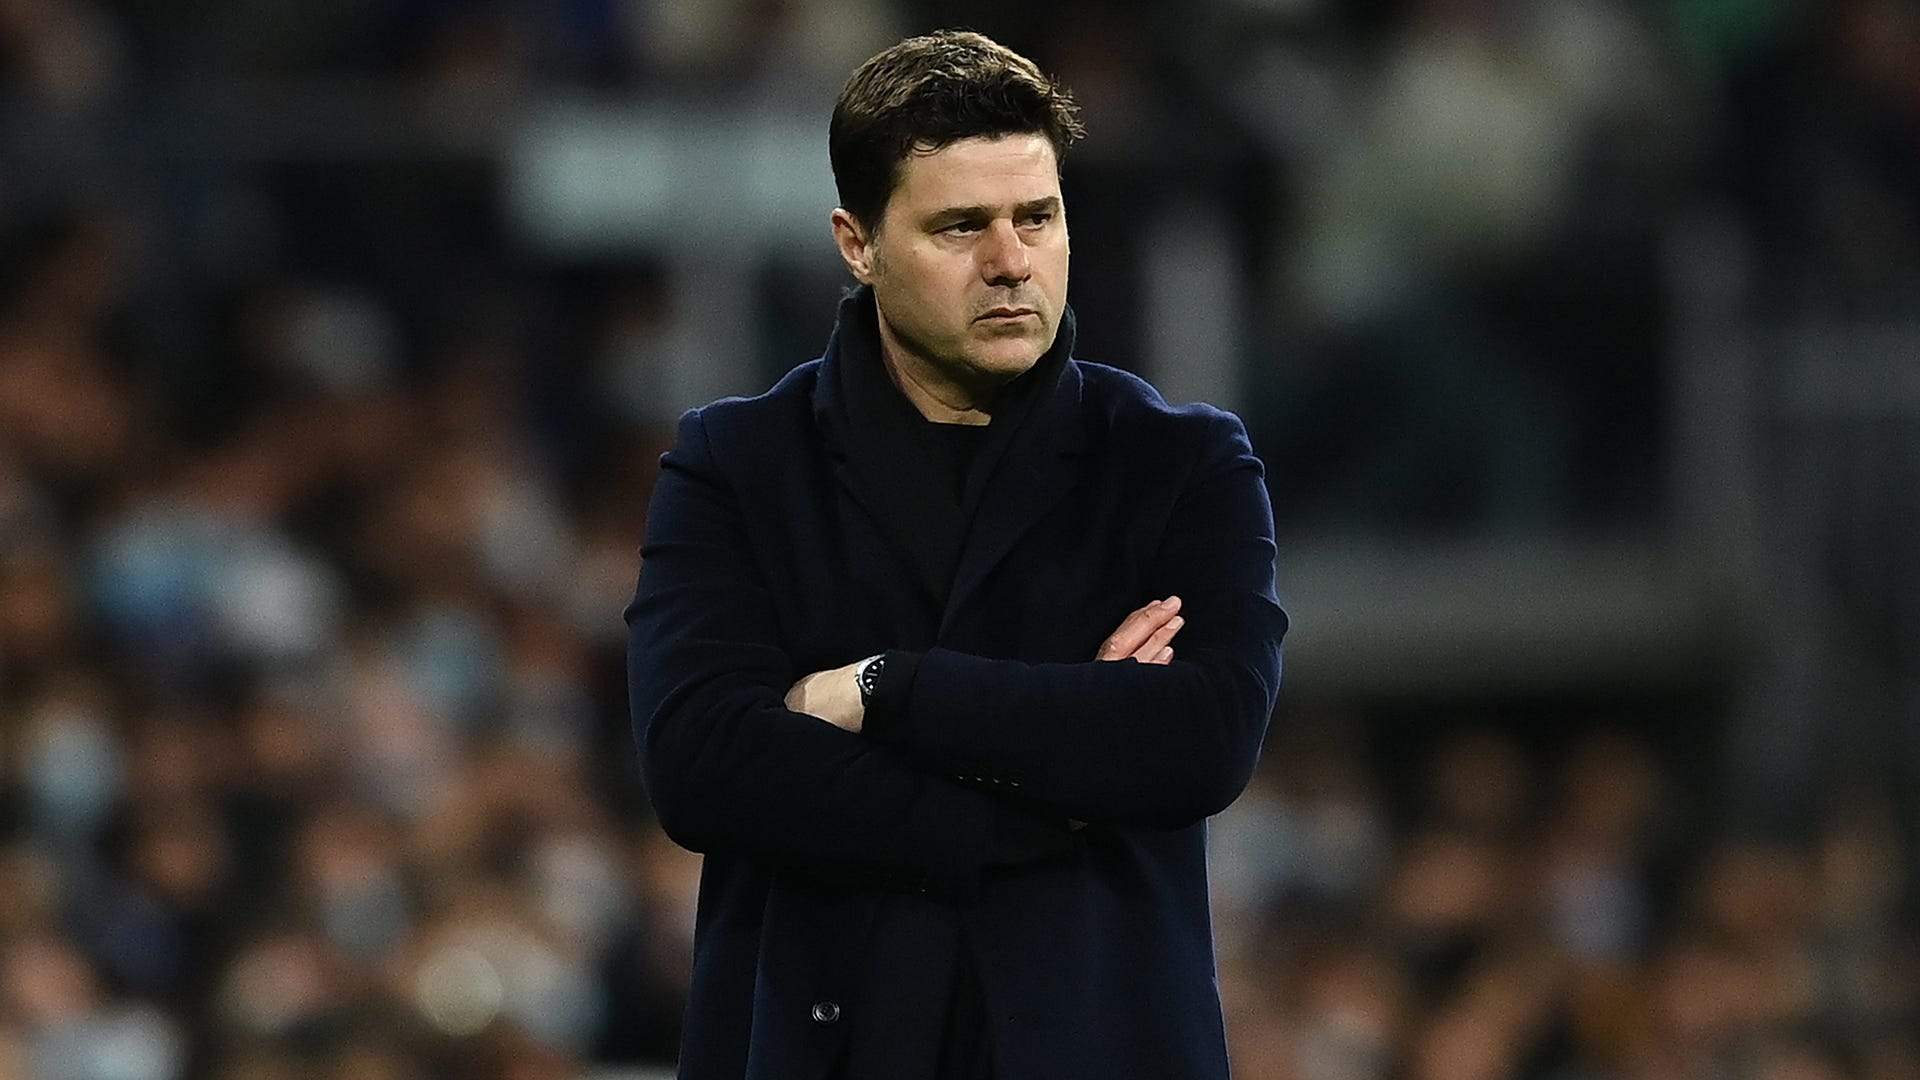 Paris Saint-Germain Officially Confirms Separation from Pochettino, Awaiting Possible Arrival of Enrique